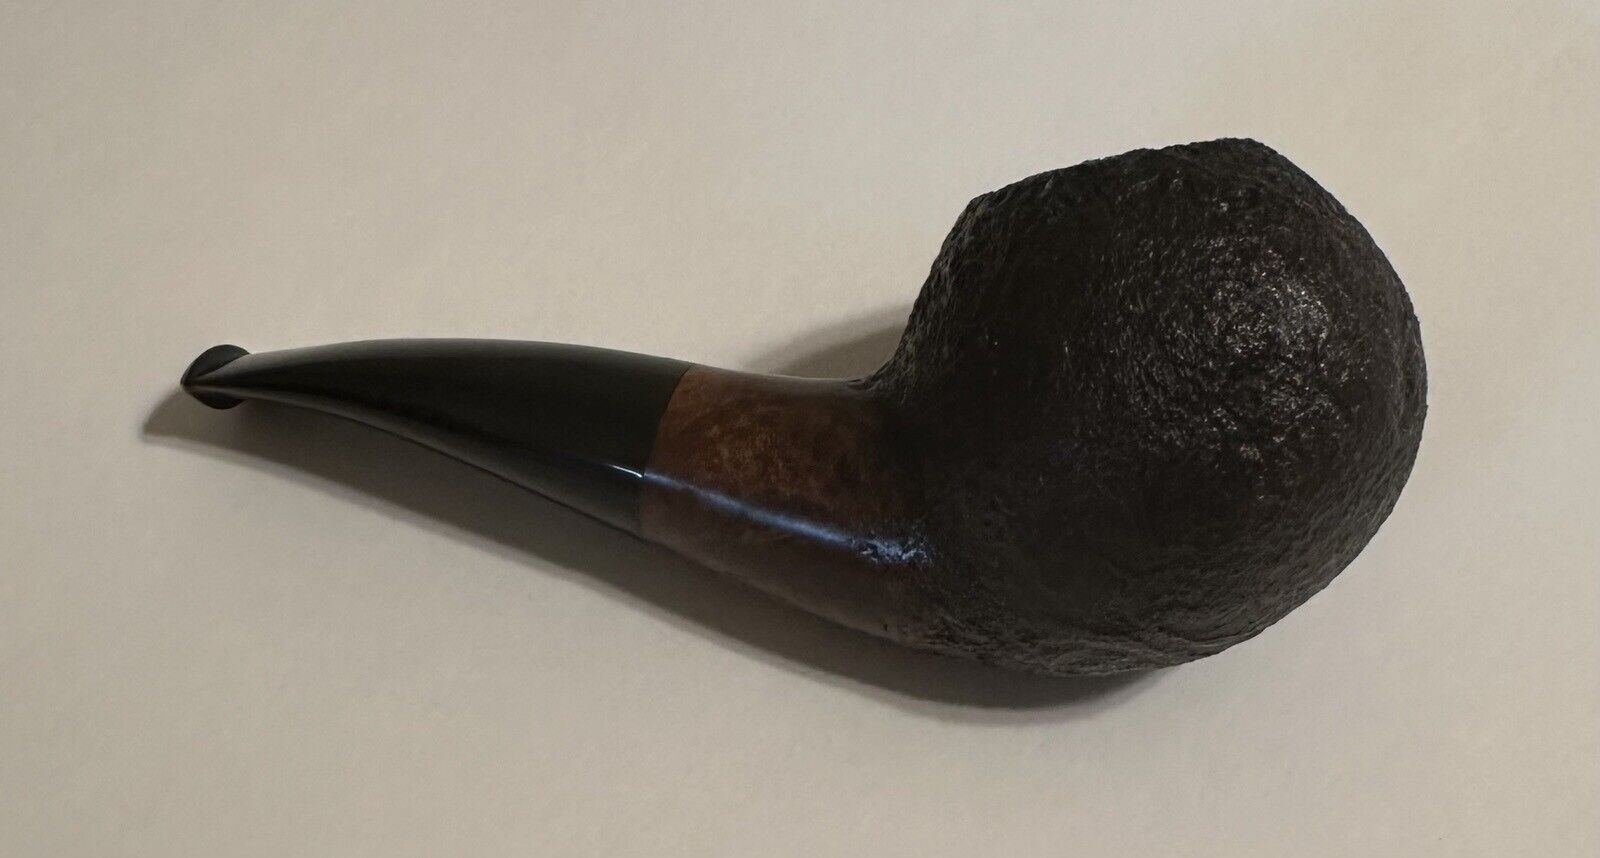 Grant Batson 2014 Pipe, New, Never Smoked, Mint Condition, Place Your Bid Now